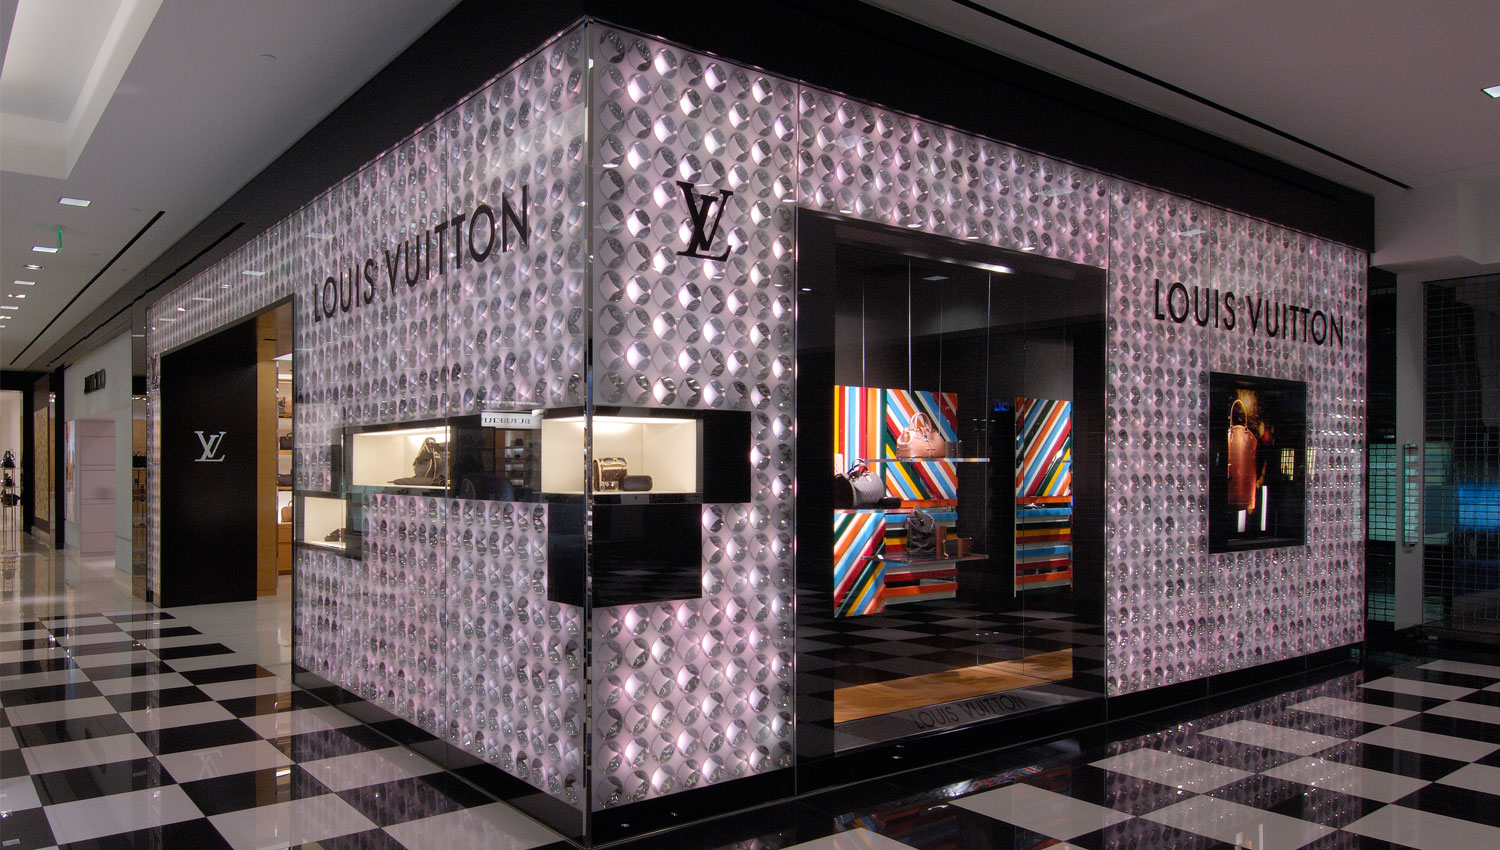 Louis Vuitton Aventura Bloomingdale's Store, United States